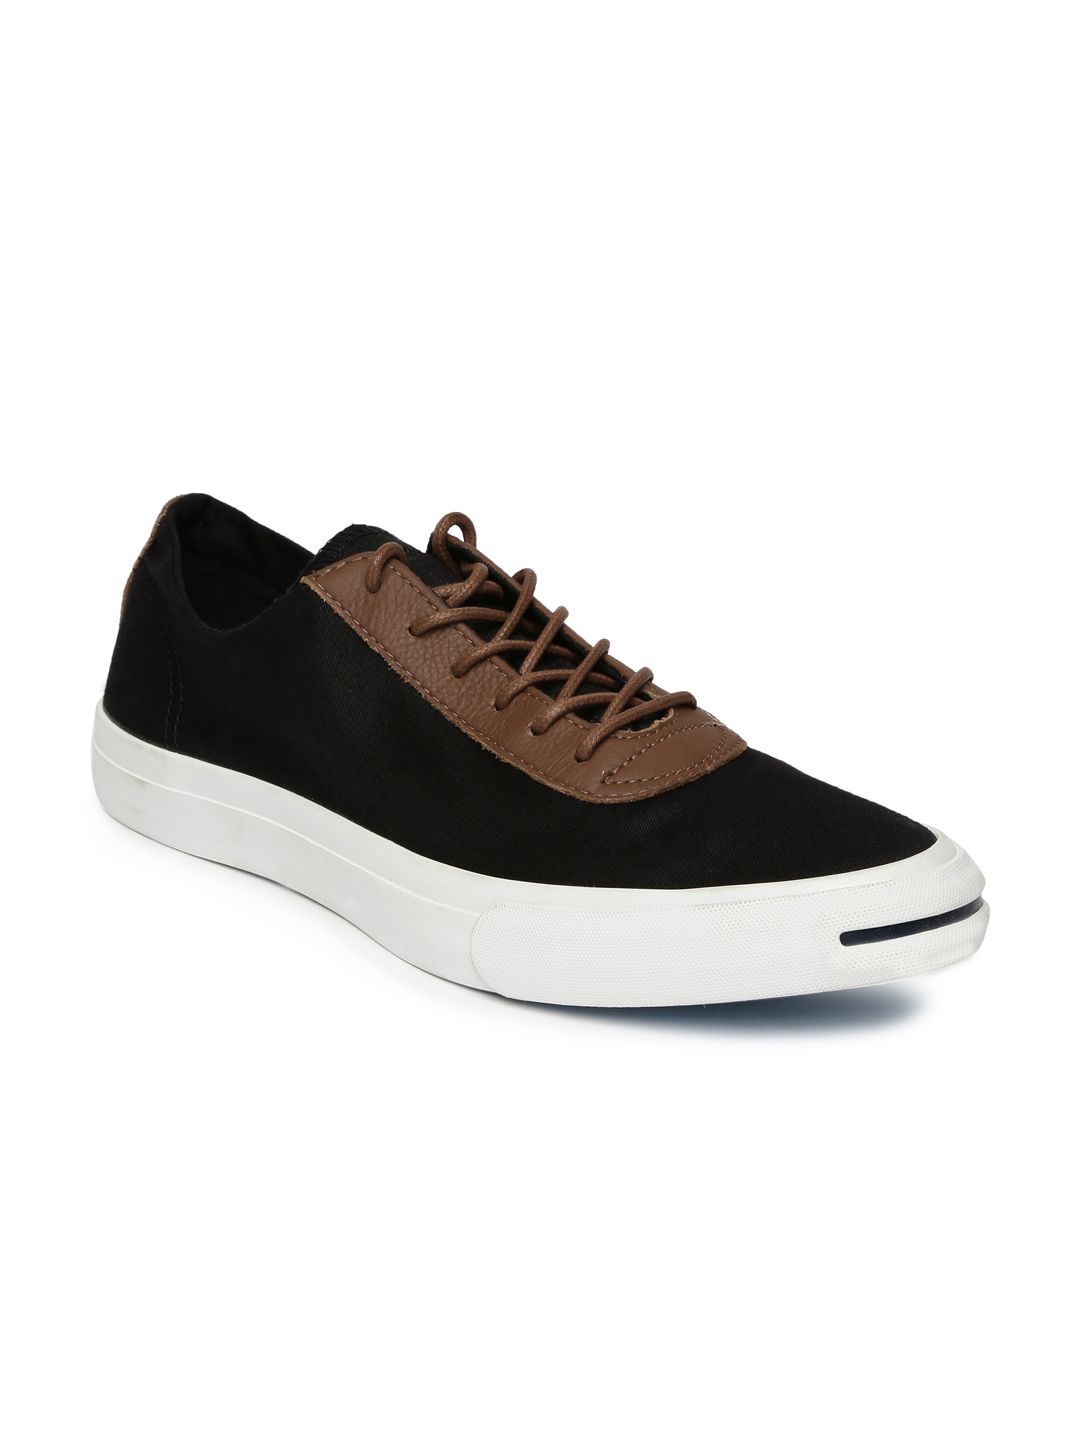 jack purcell converse india